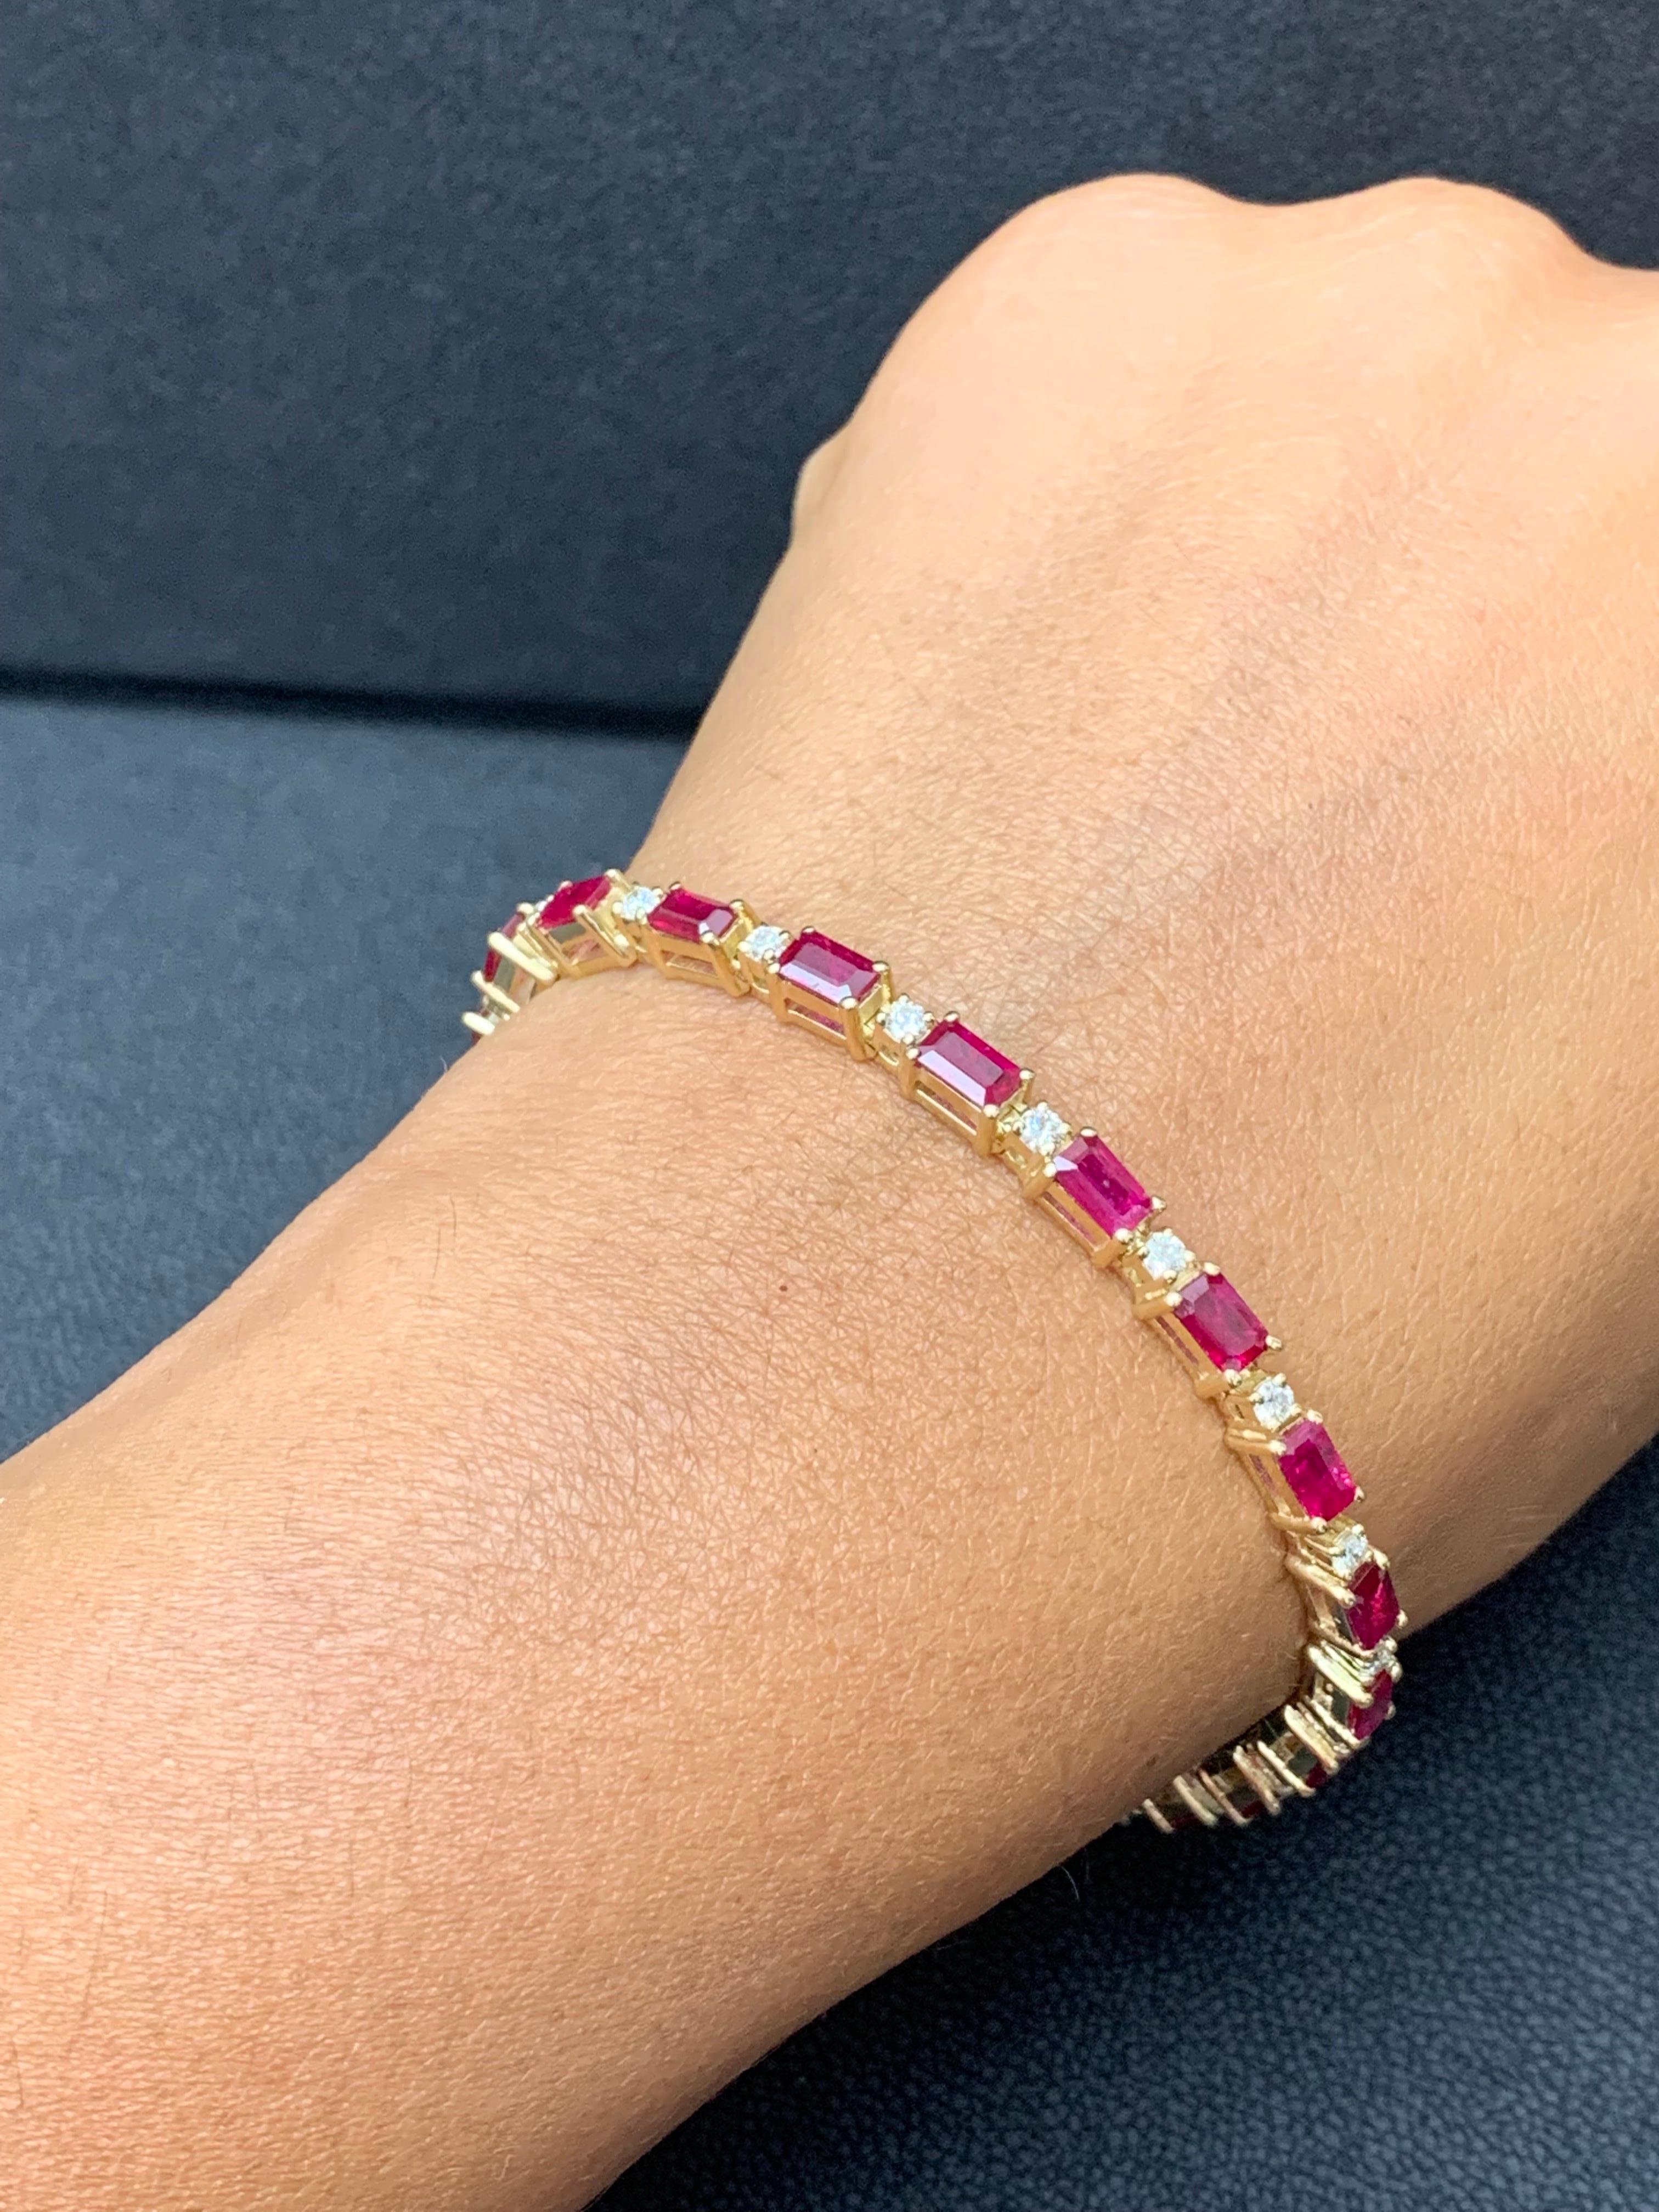 6.12 Carat Emerald Cut Ruby and Diamond Bracelet in 14K Yellow Gold For Sale 7